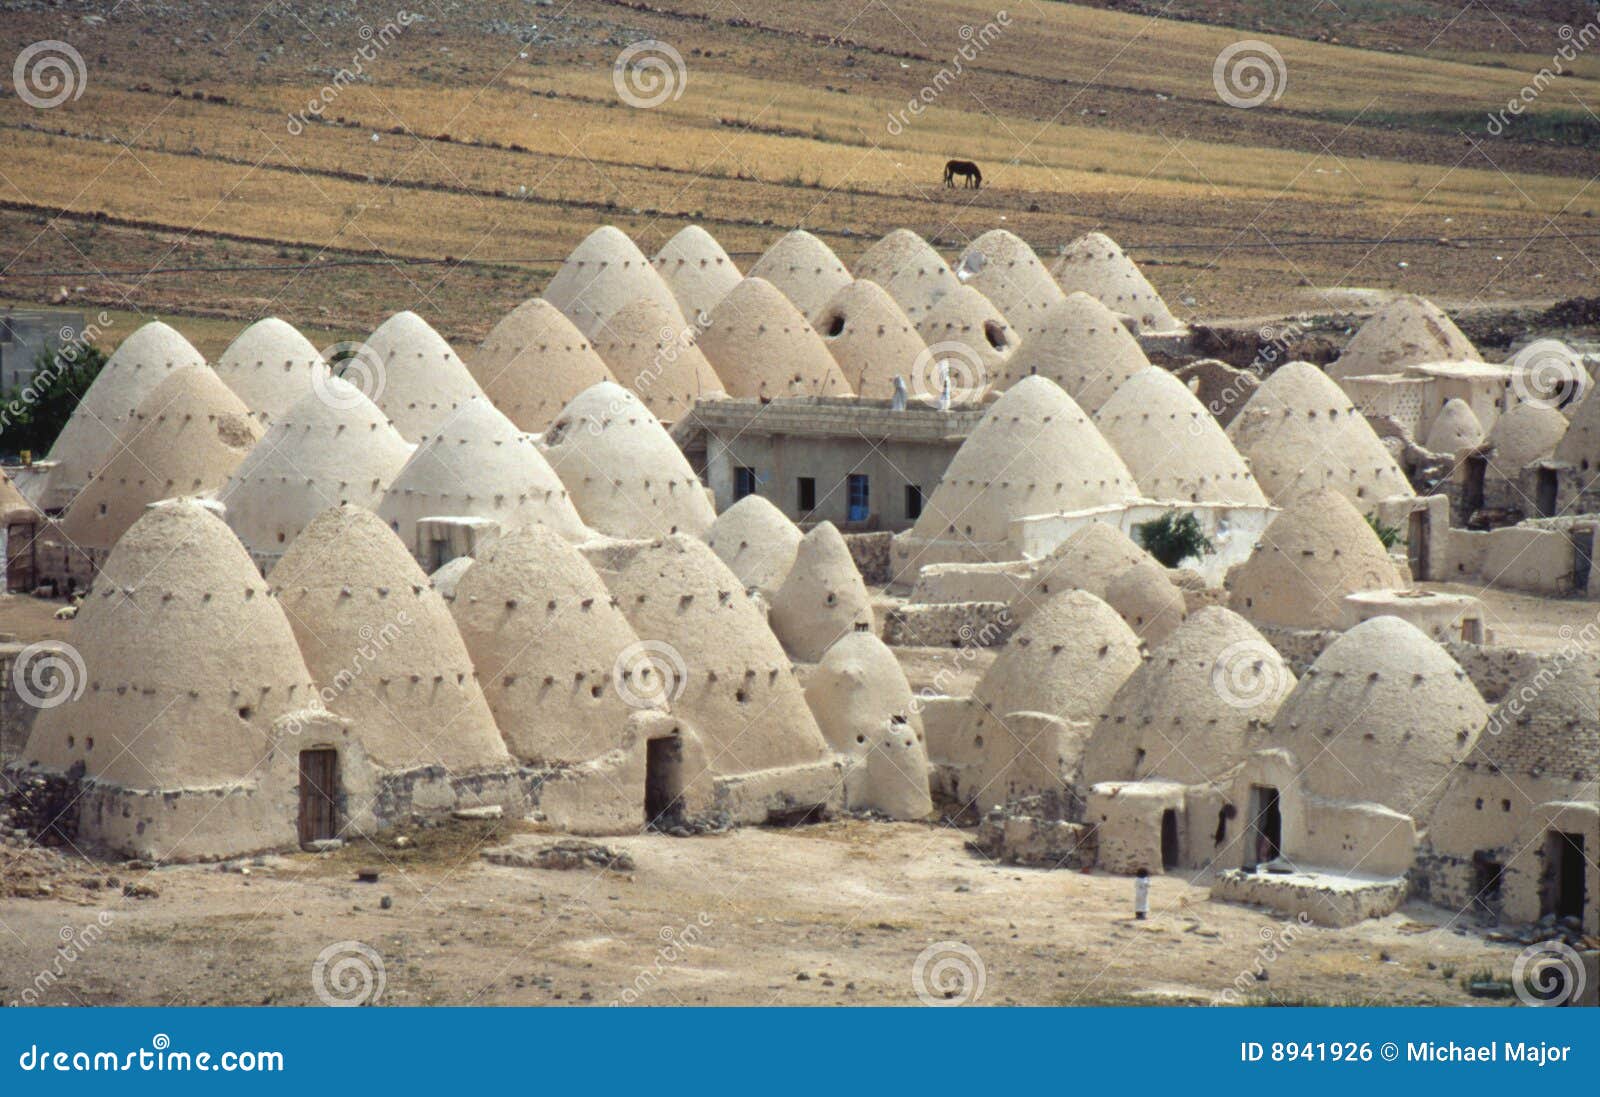 domed huts in syria